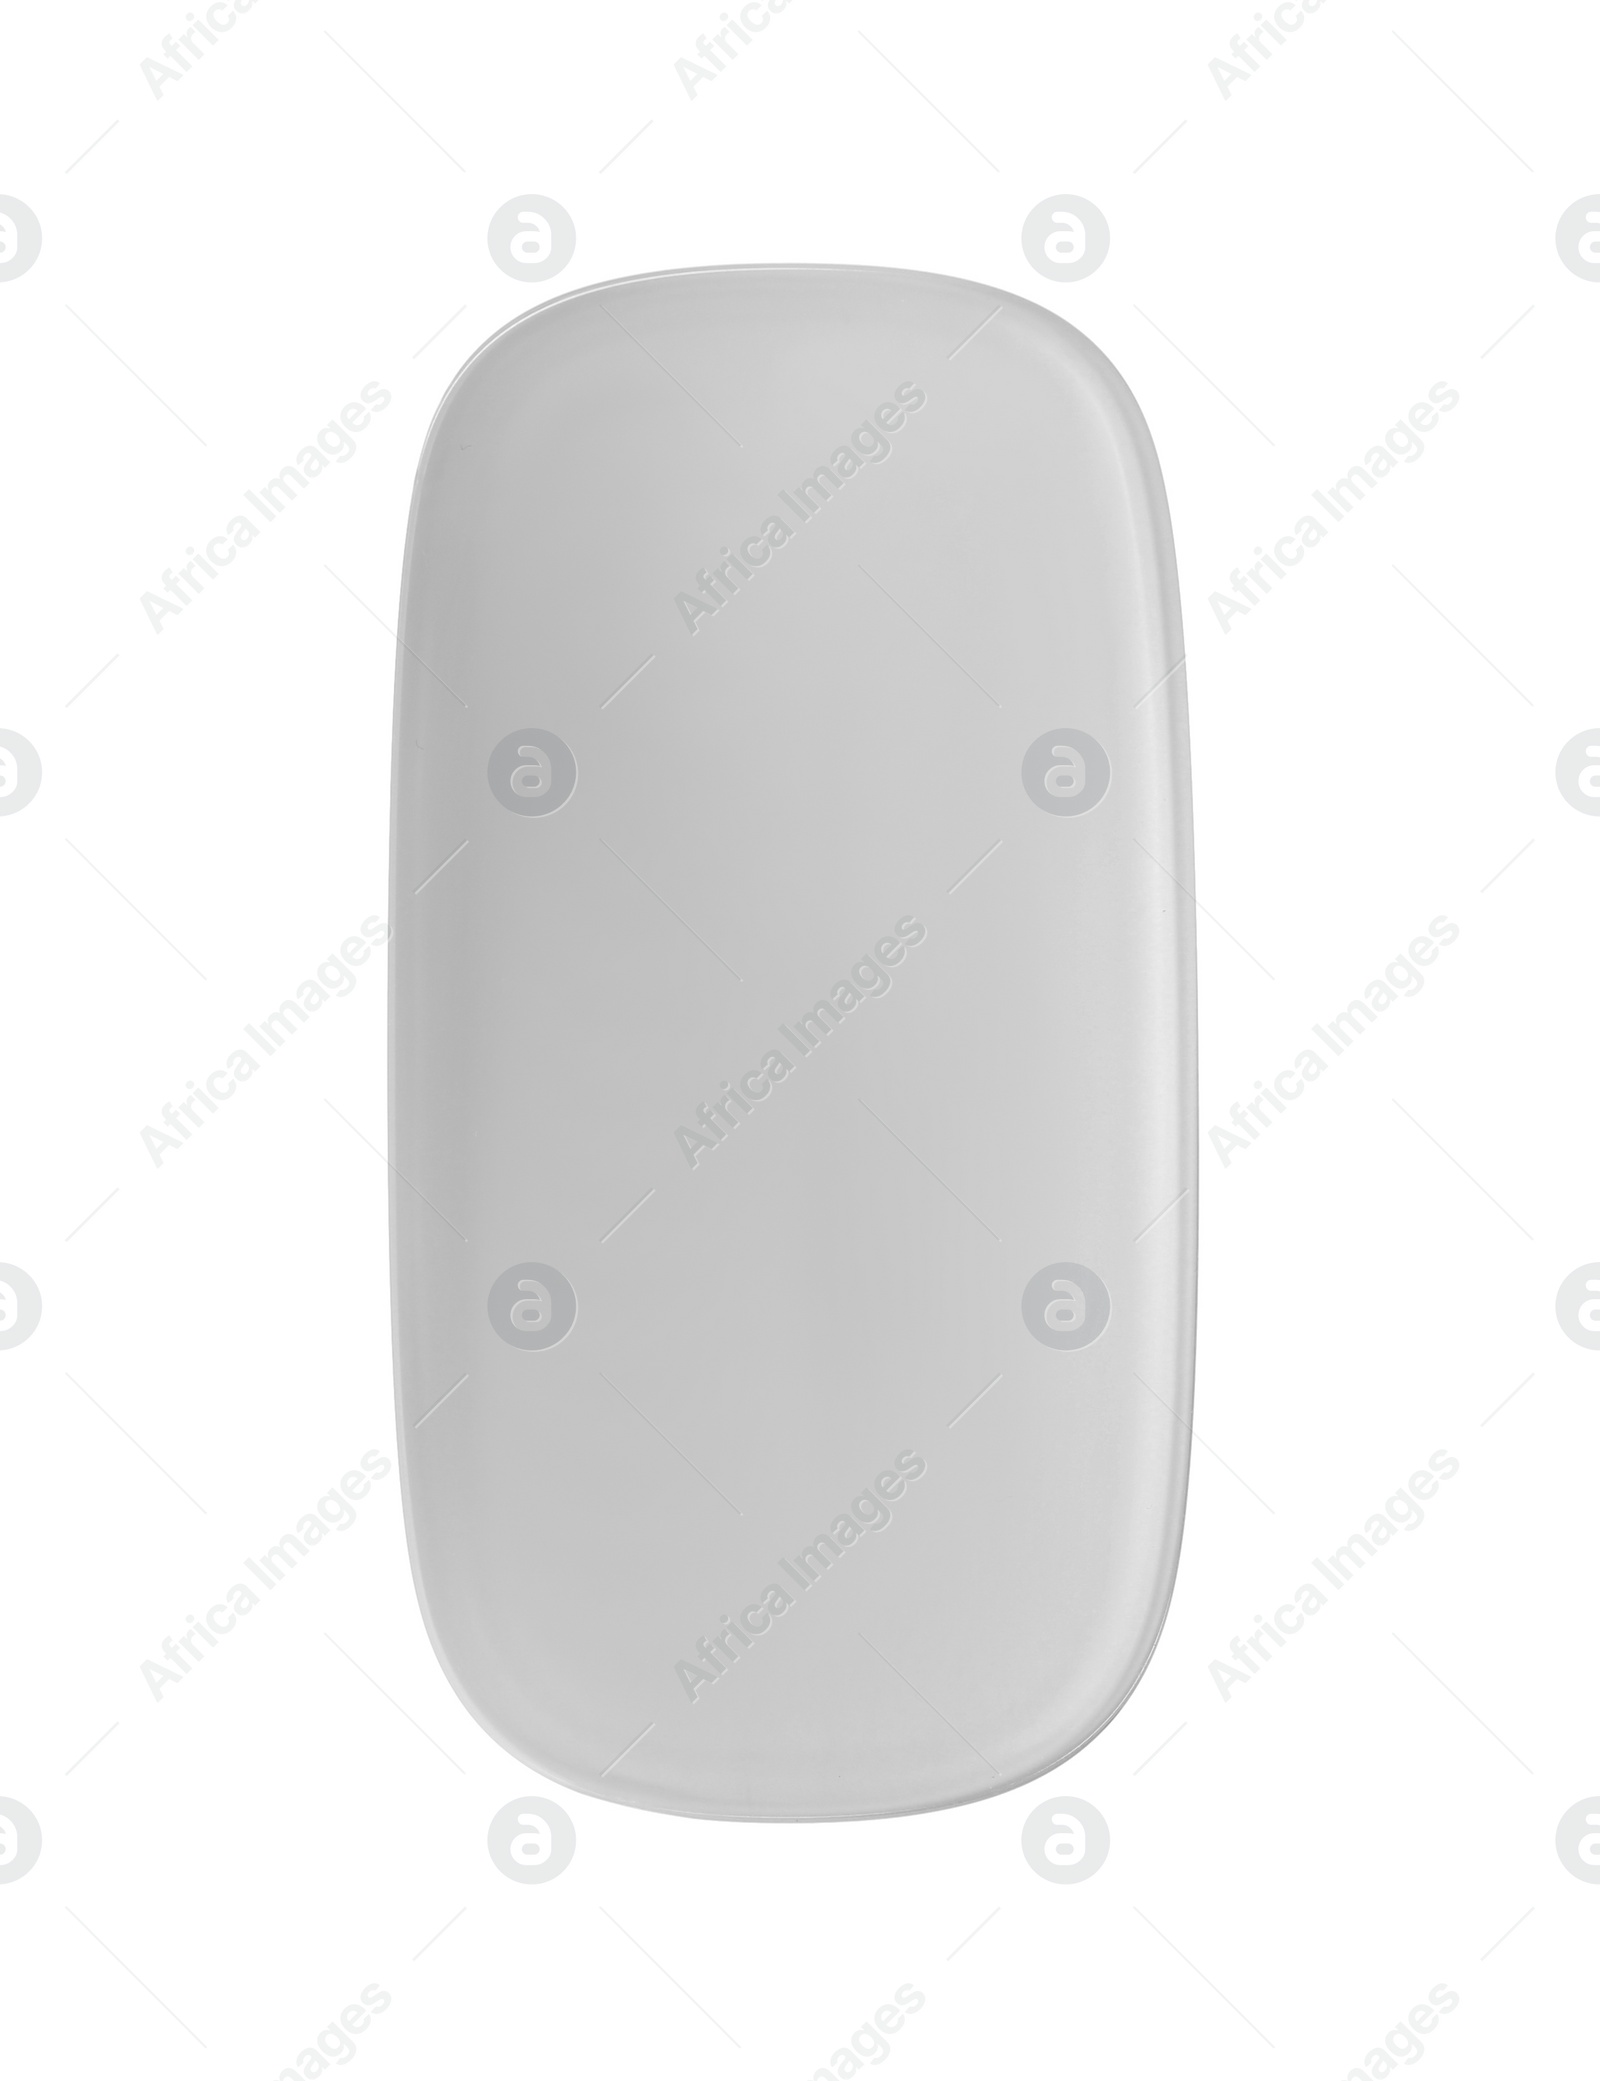 Photo of Modern computer mouse on white background